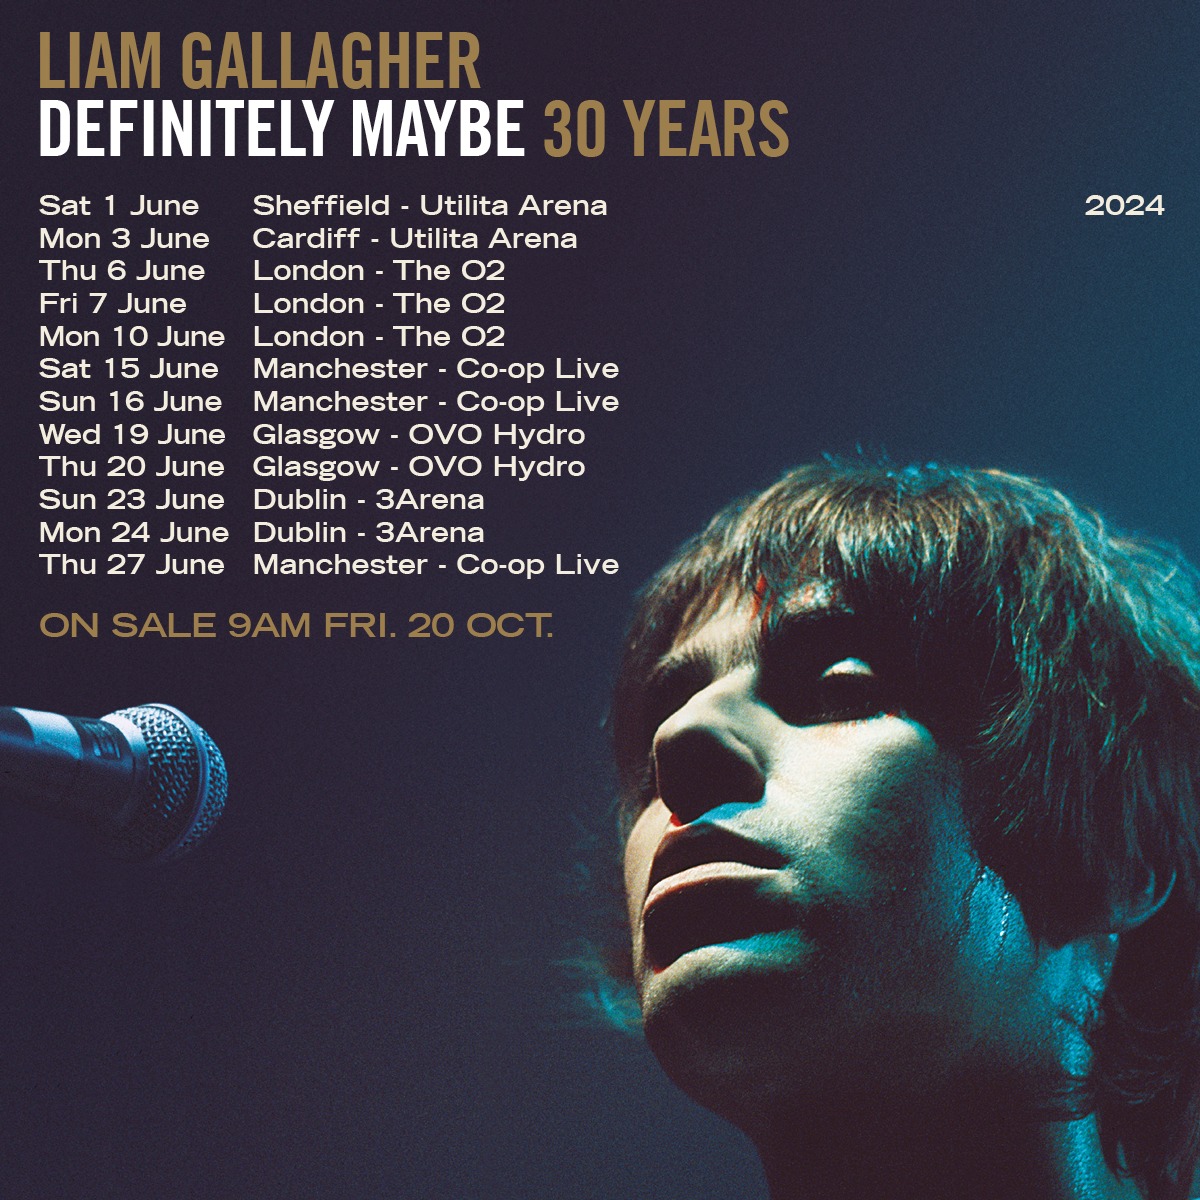 Liam Gallagher - Definitely Maybe at The O2 Arena Tickets